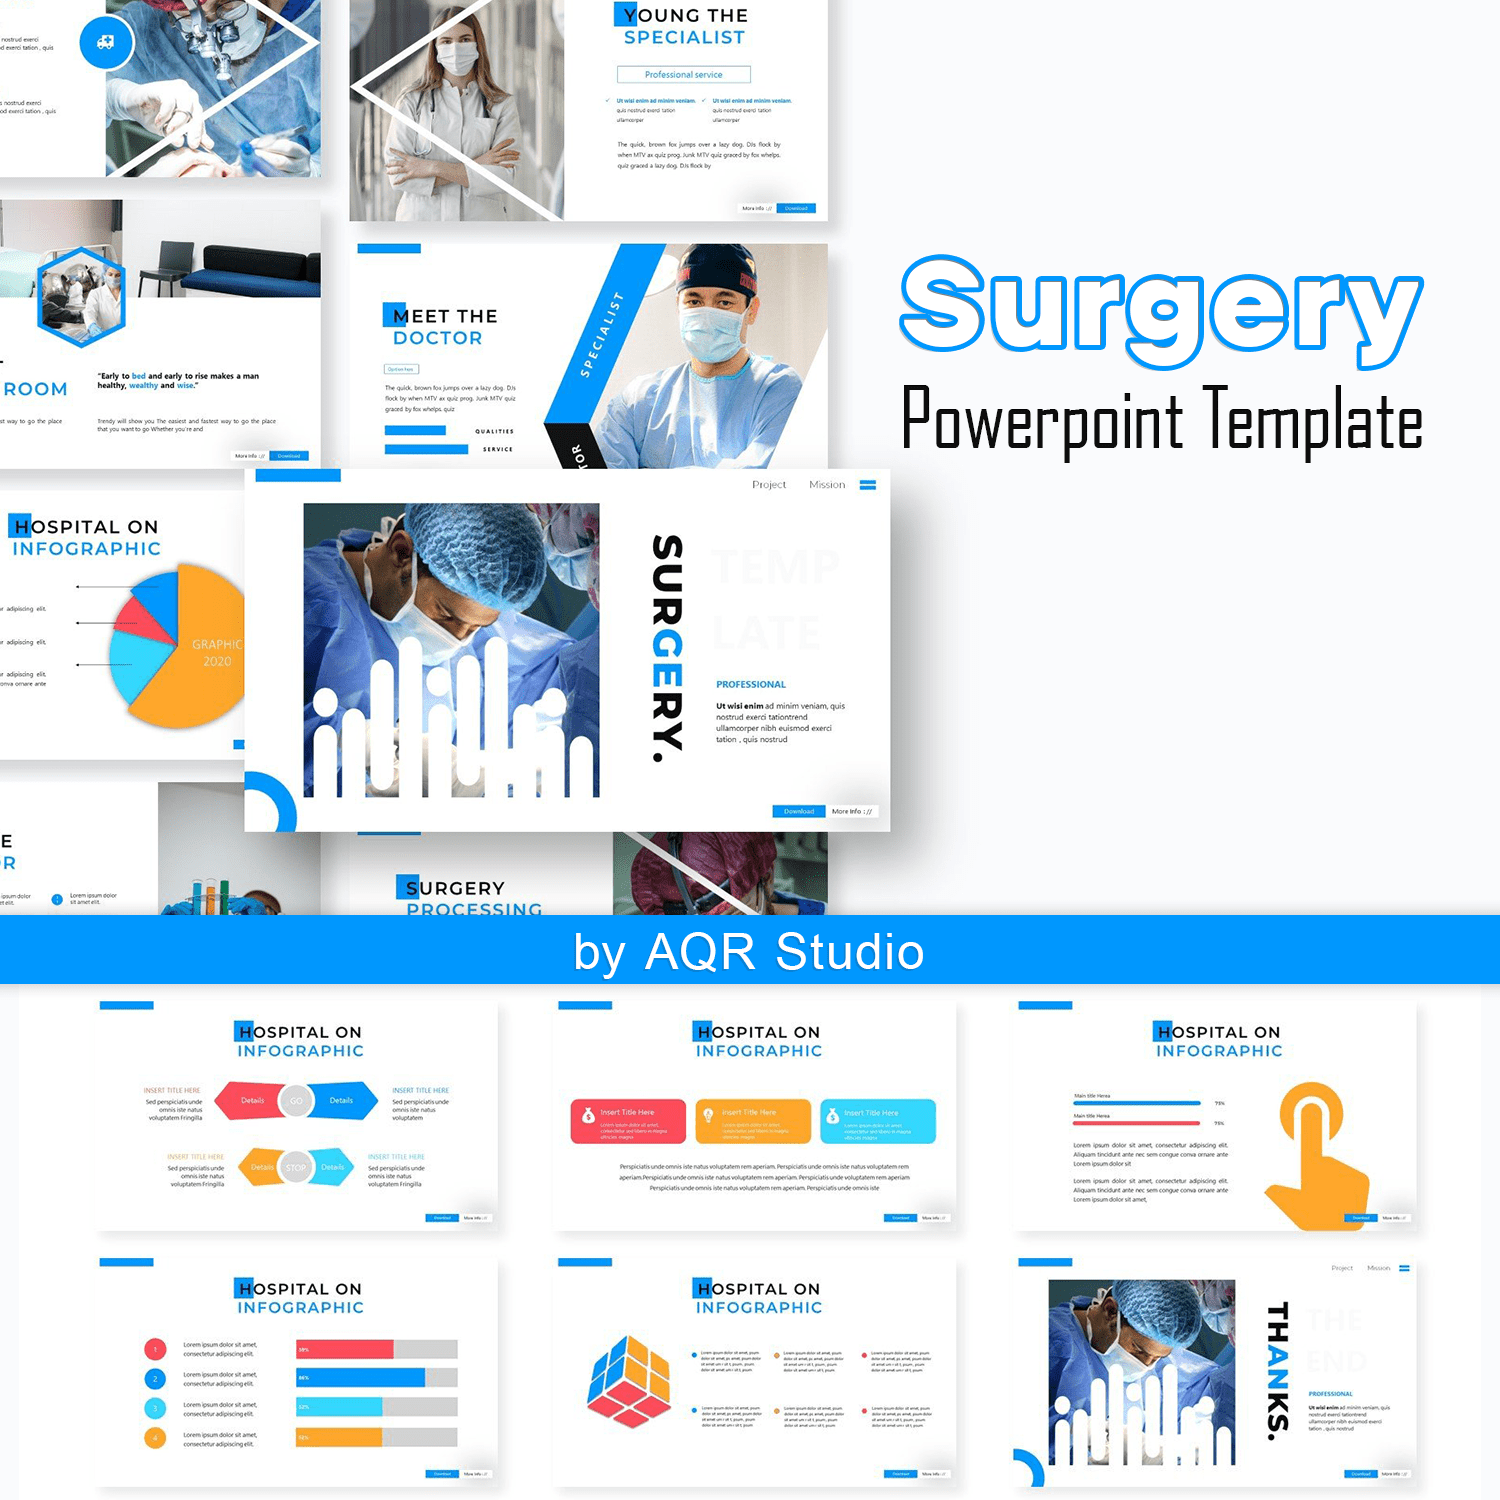 Surgery - Powerpoint Template cover.